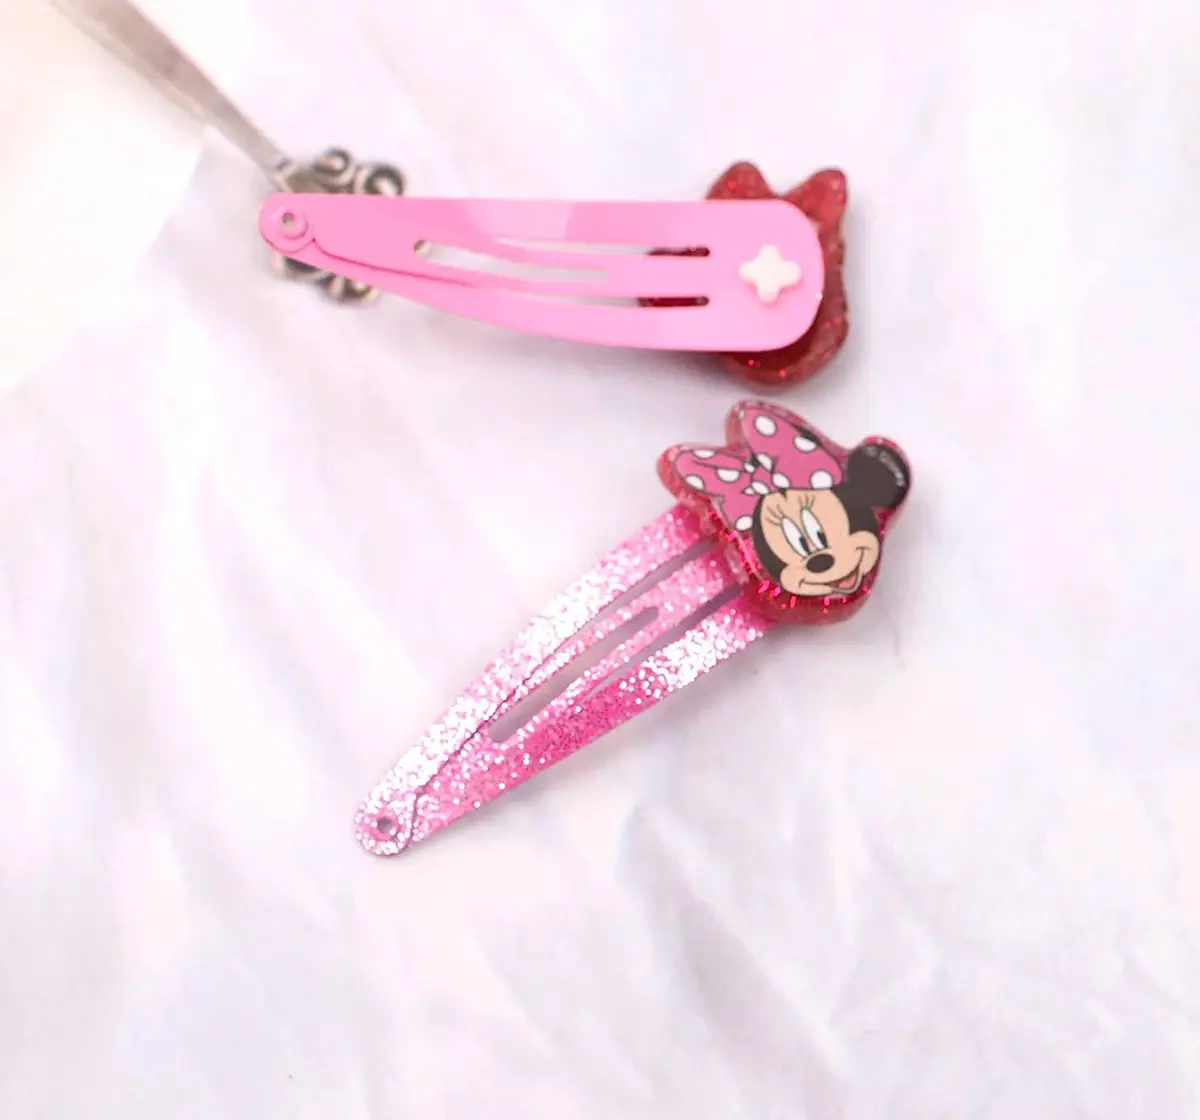 Li'l Diva Minnie Mouse Hair Accessories Pack of 6 Pink For Girls of Age 3Y+, Multicolour